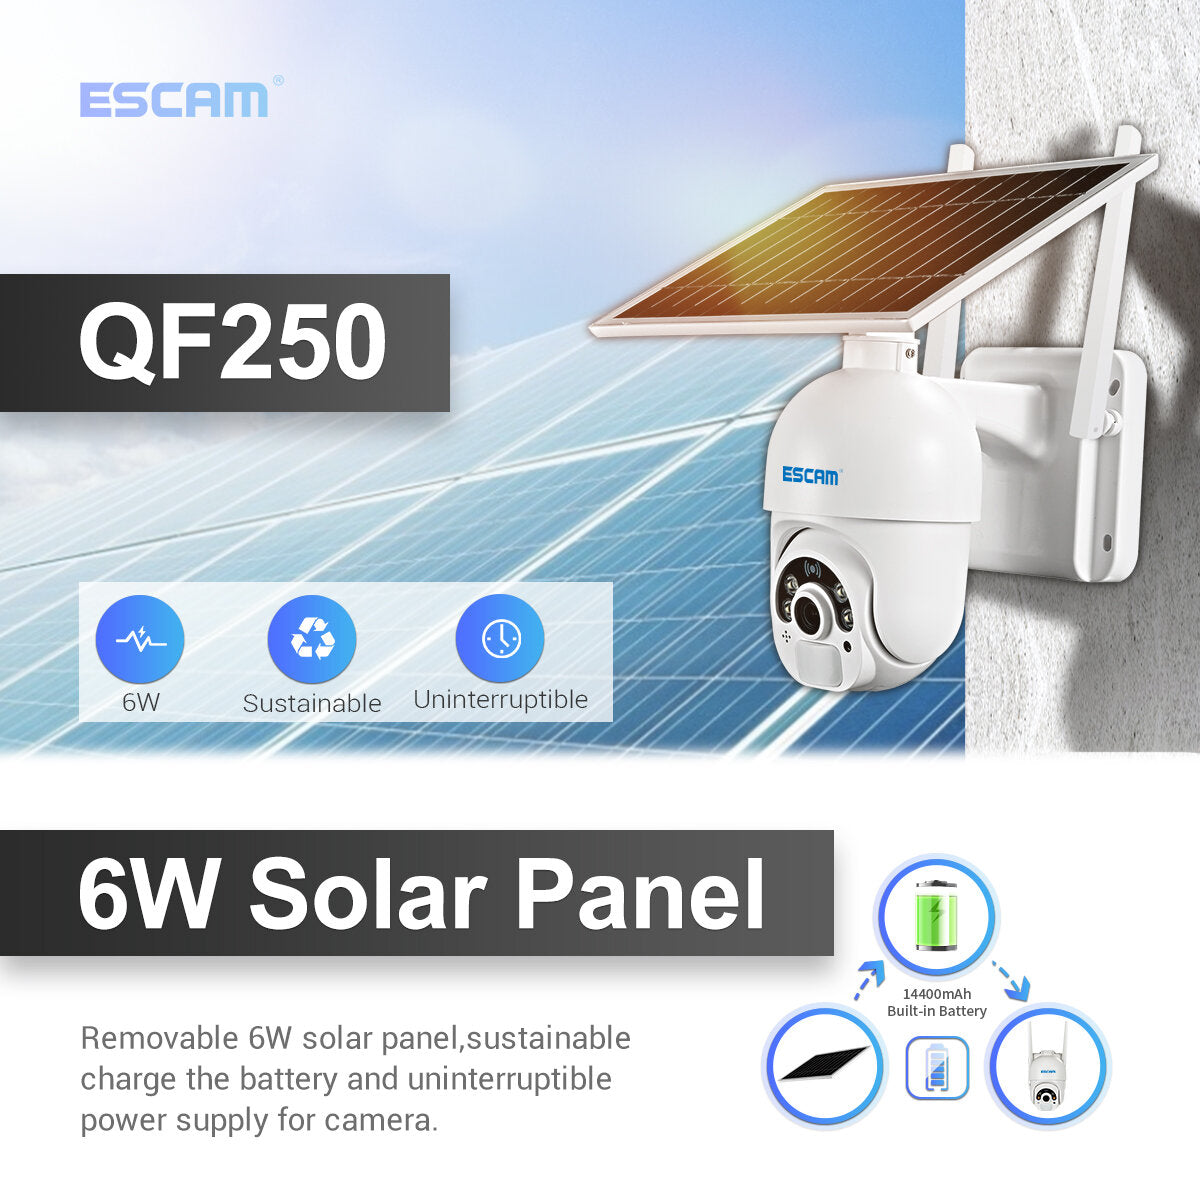 1080P Cloud Storage WIFI Battery PIR Alarm Dome IP Camera With Solar Panel Full Color Night Vision PTZ Two Way Audio IP66